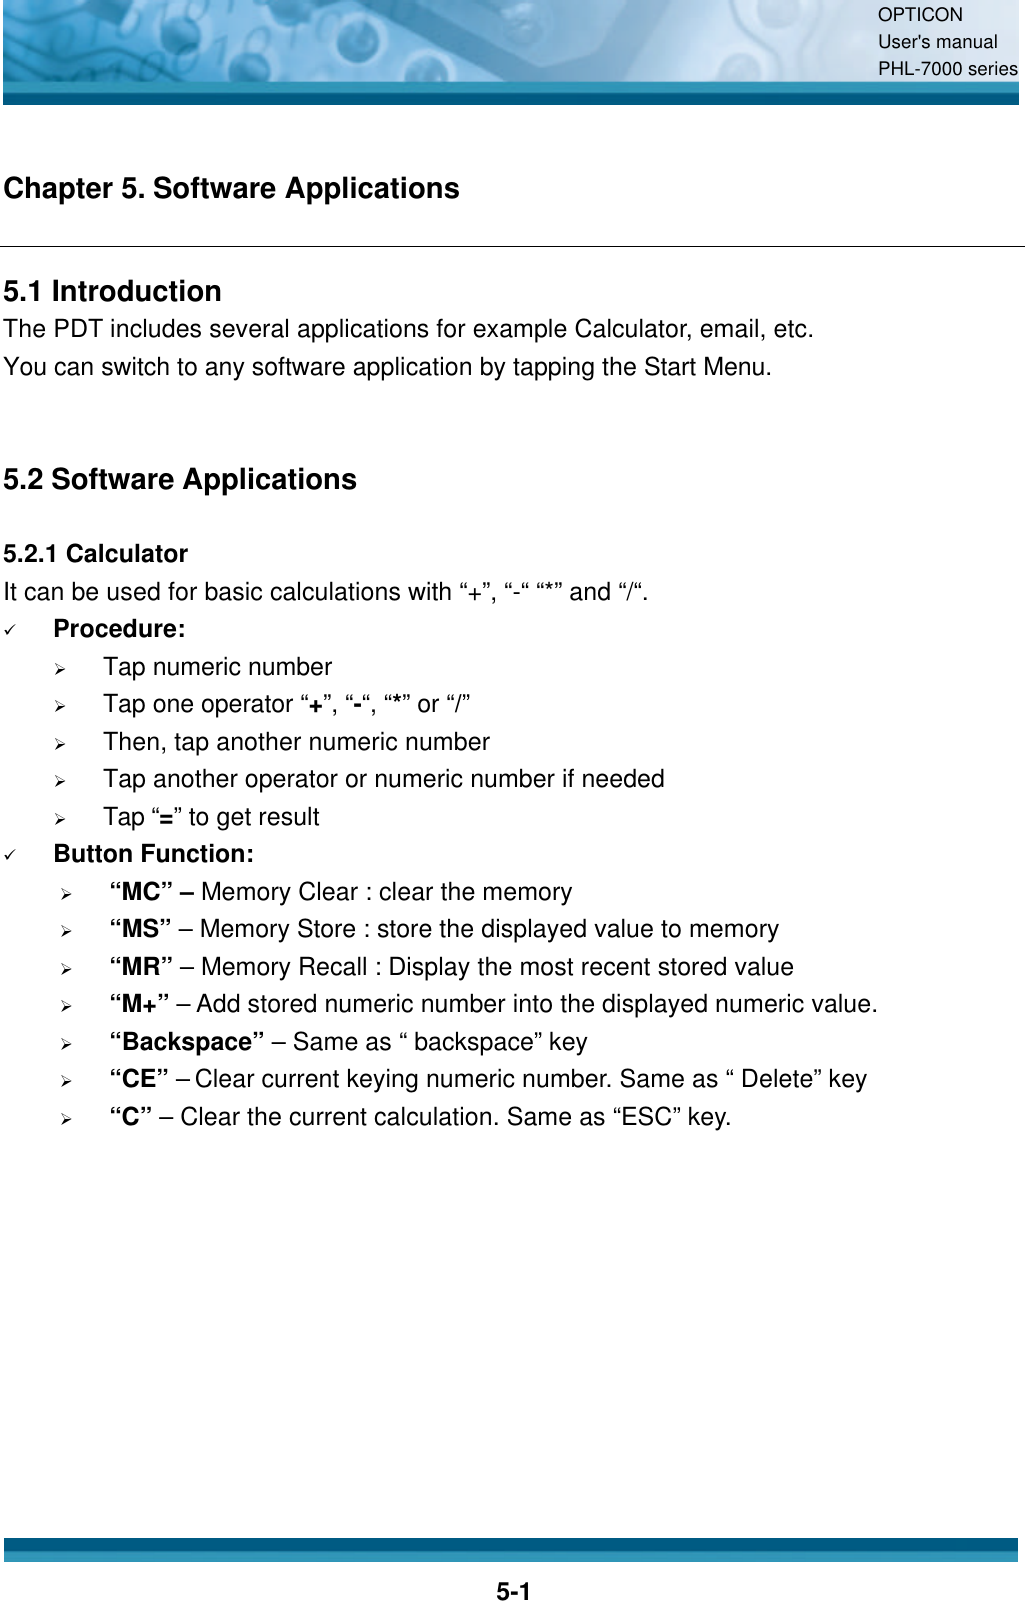 OPTICON User&apos;s manual PHL-7000 series    5-1 Chapter 5. Software Applications 5.1 Introduction The PDT includes several applications for example Calculator, email, etc. You can switch to any software application by tapping the Start Menu.   5.2 Software Applications  5.2.1 Calculator It can be used for basic calculations with “+”, “-“ “*” and “/“.  ü Procedure: Ø Tap numeric number   Ø Tap one operator “+”, “-“, “*” or “/”   Ø Then, tap another numeric number Ø Tap another operator or numeric number if needed Ø Tap “=” to get result ü Button Function: Ø “MC” – Memory Clear : clear the memory Ø “MS” – Memory Store : store the displayed value to memory Ø “MR” – Memory Recall : Display the most recent stored value Ø “M+” – Add stored numeric number into the displayed numeric value. Ø “Backspace” – Same as “ backspace” key Ø “CE” – Clear current keying numeric number. Same as “ Delete” key Ø “C” – Clear the current calculation. Same as “ESC” key.   